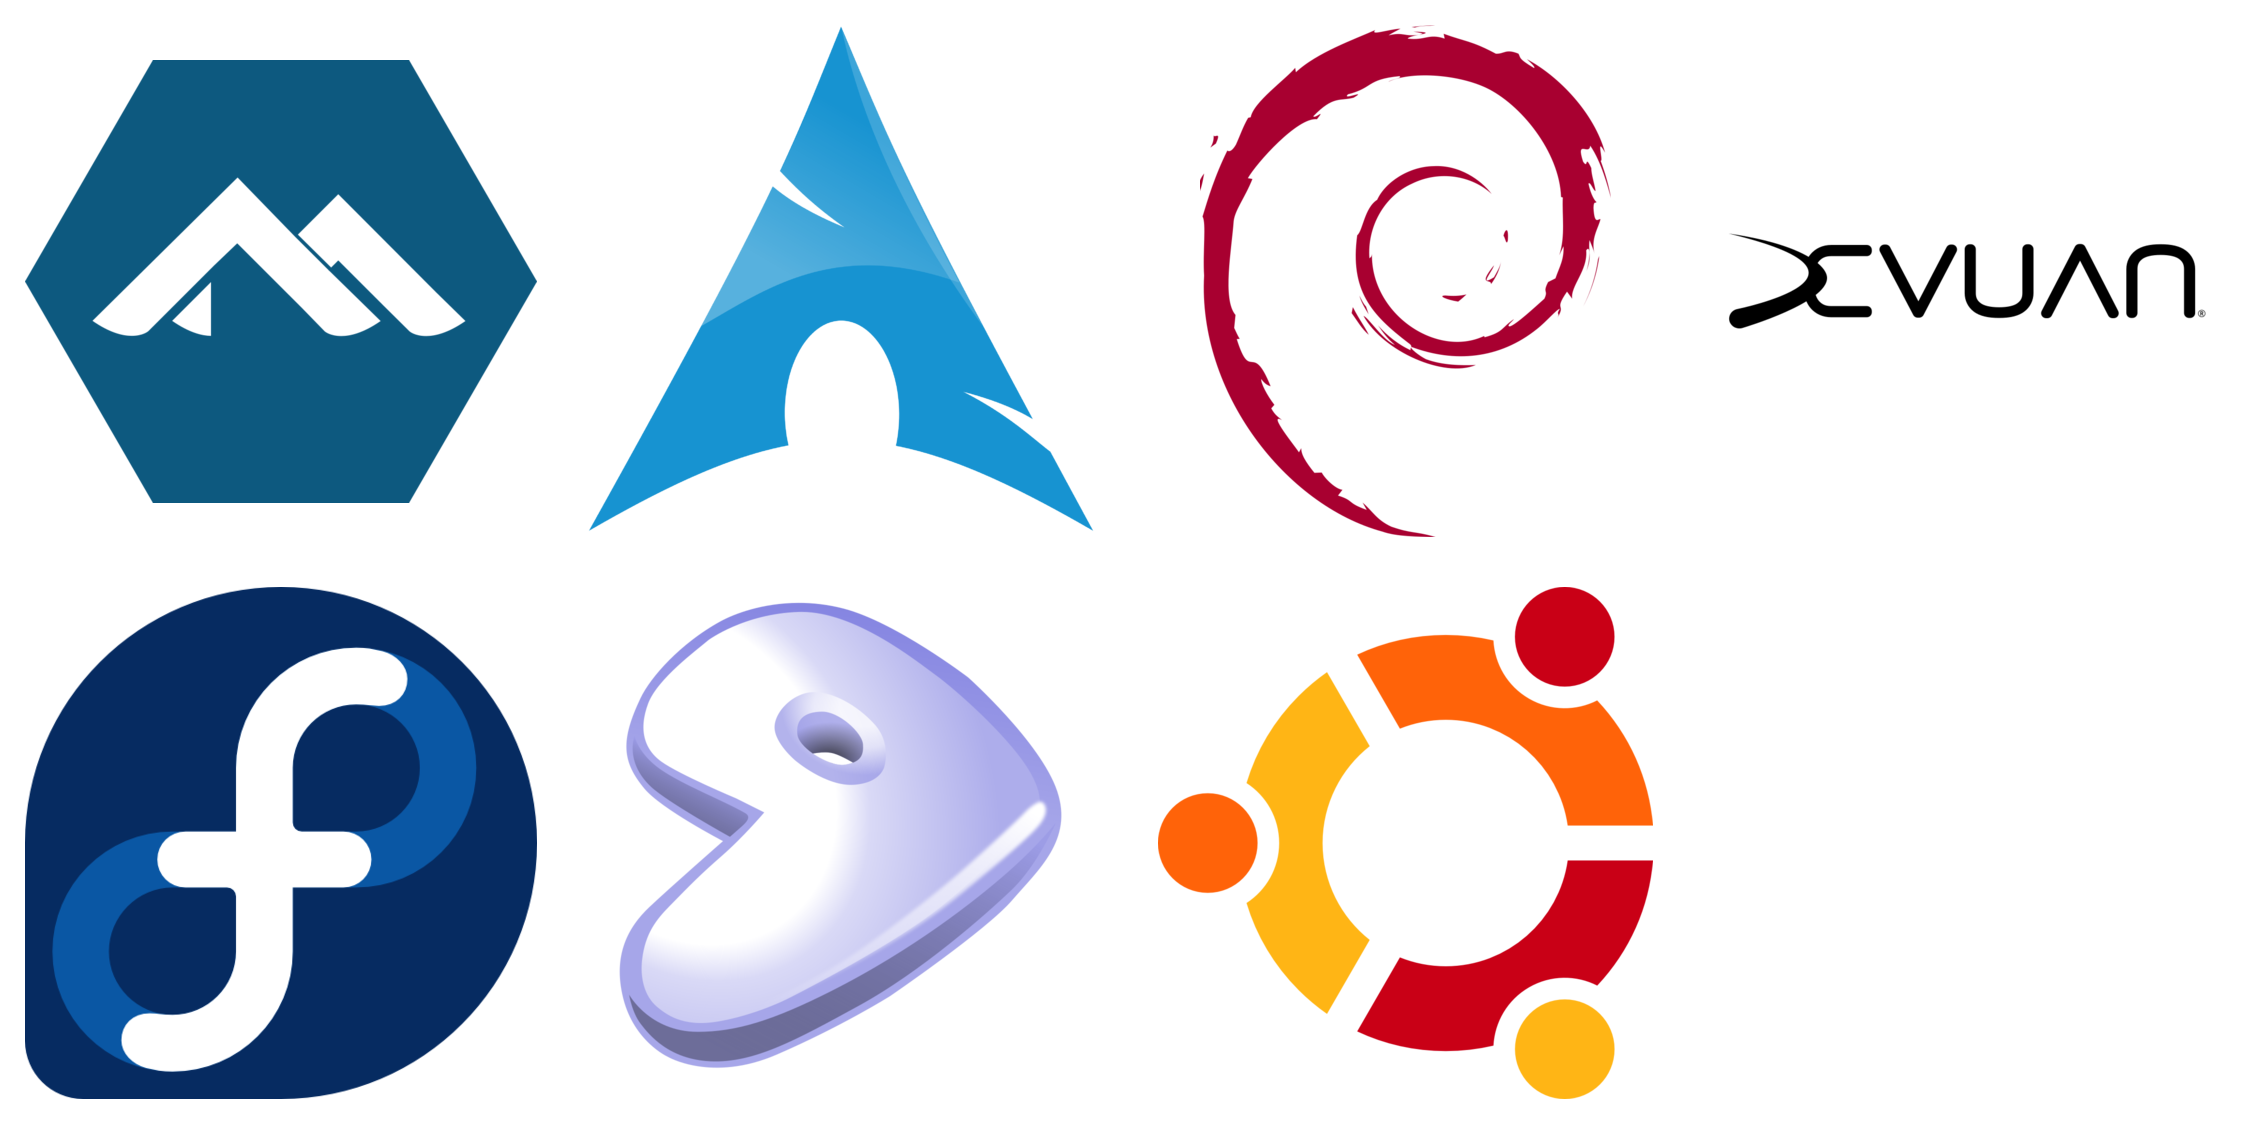 The logos of a number of different linux distributions.